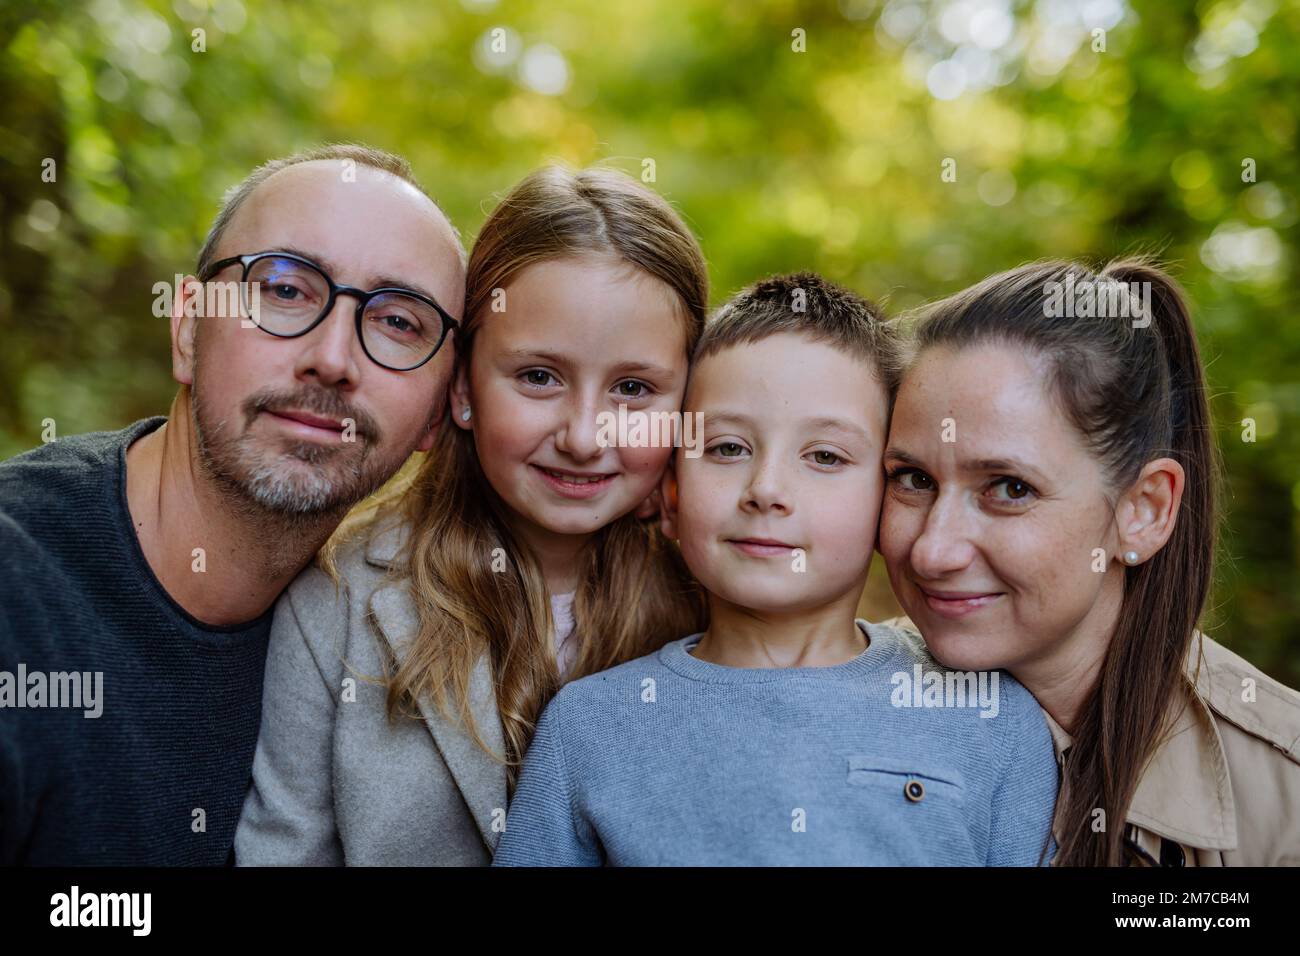 Portrait of happy family with kids in a forest. Stock Photo